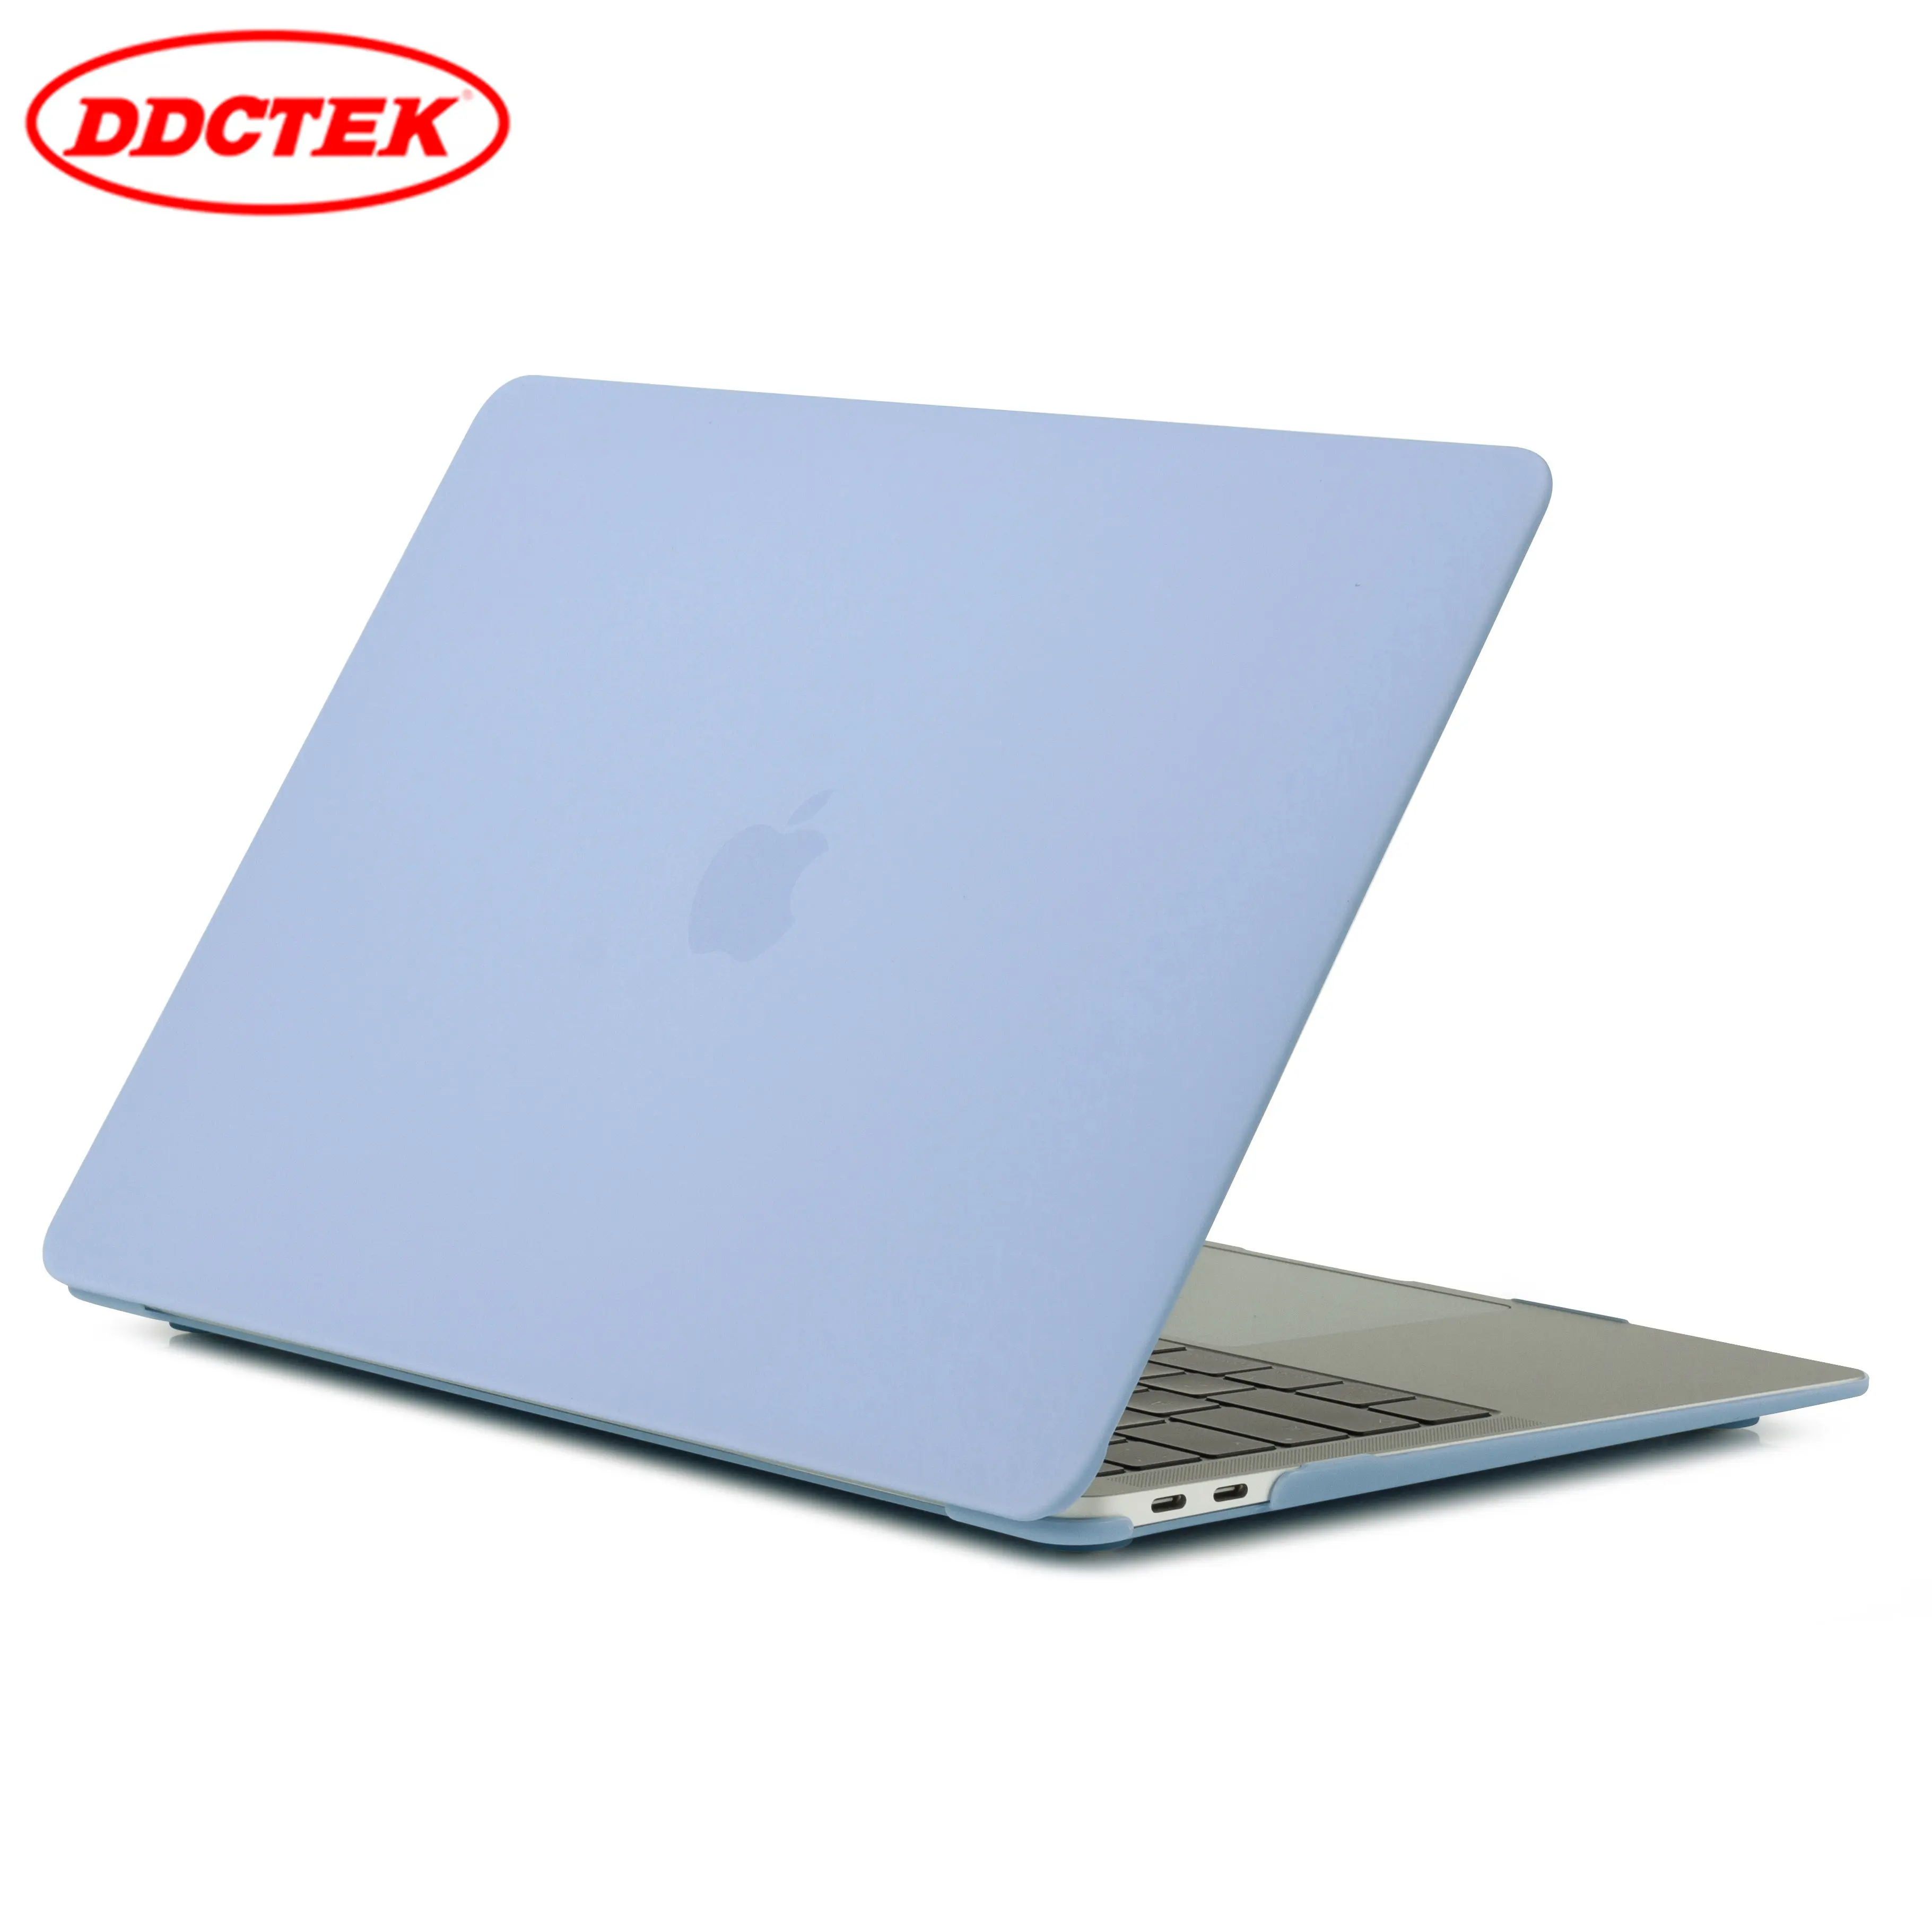 China production frosted mac body surface protector laptop case cover for apple computer new macbook sleeve